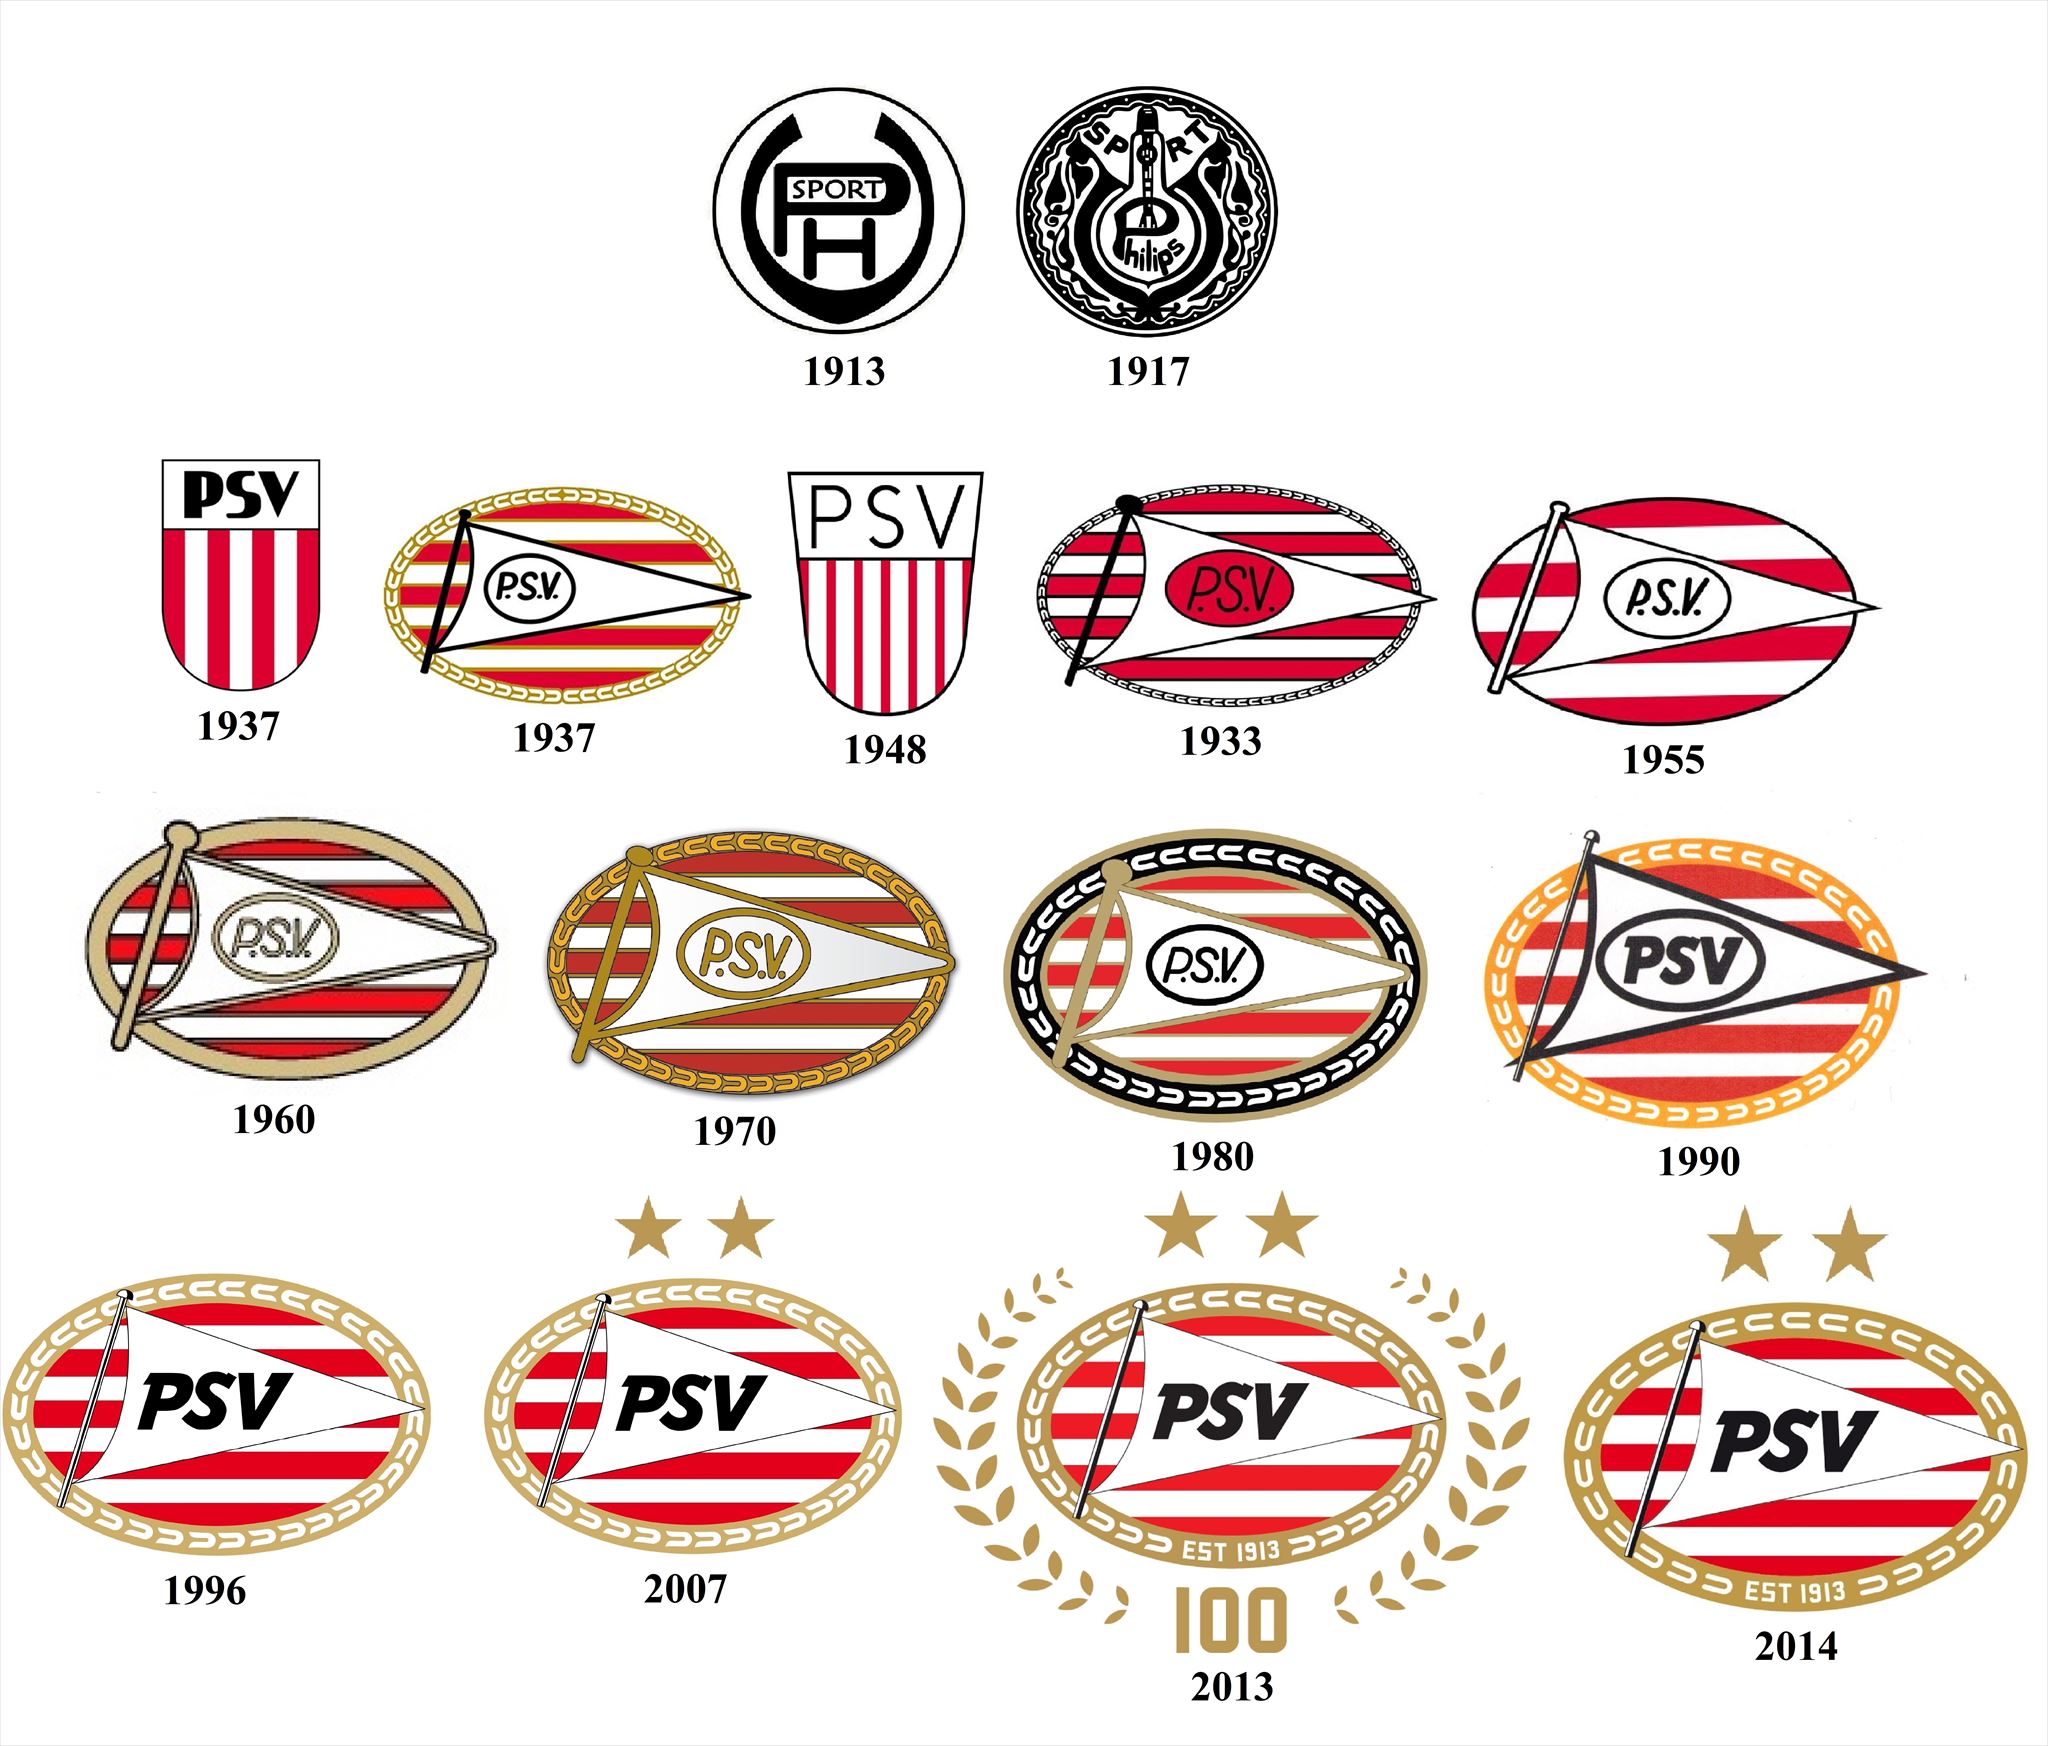 Evolution of Football Crests: Torino F.C. Quiz - By bucoholico2